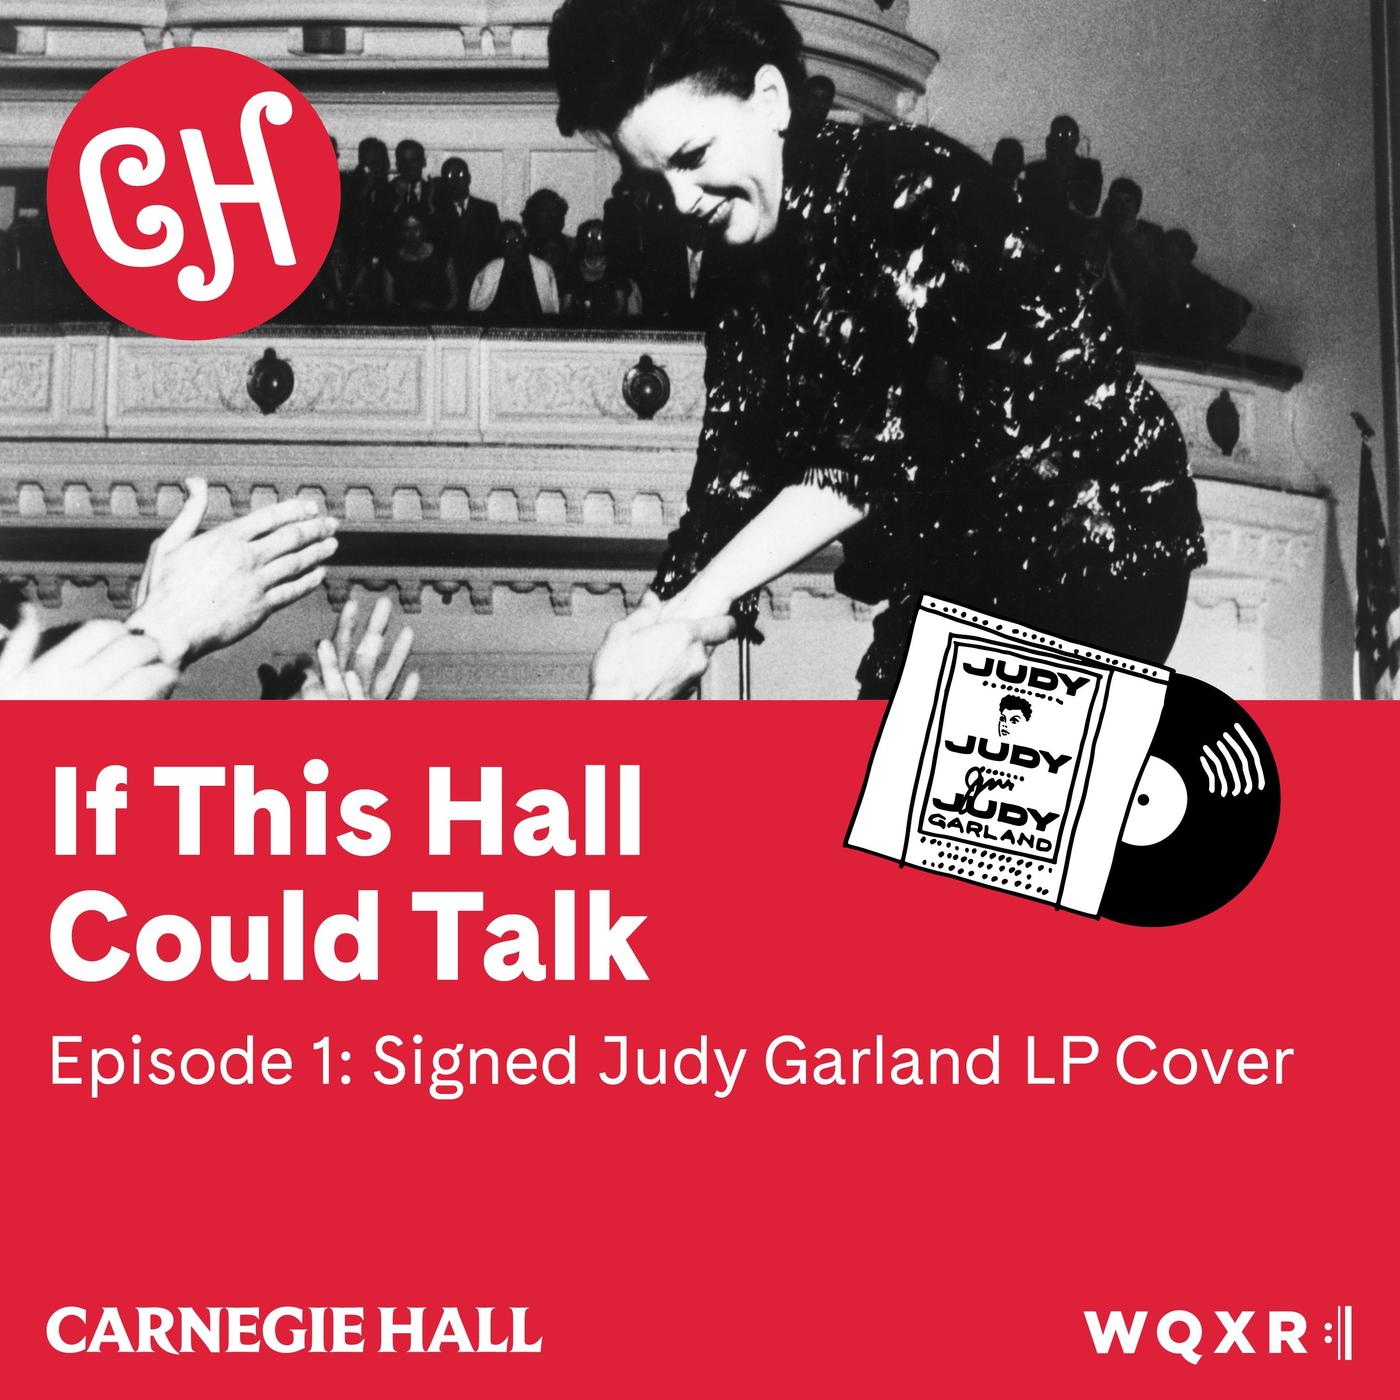 Episode 1: Judy Garland’s Autographed Album Cover